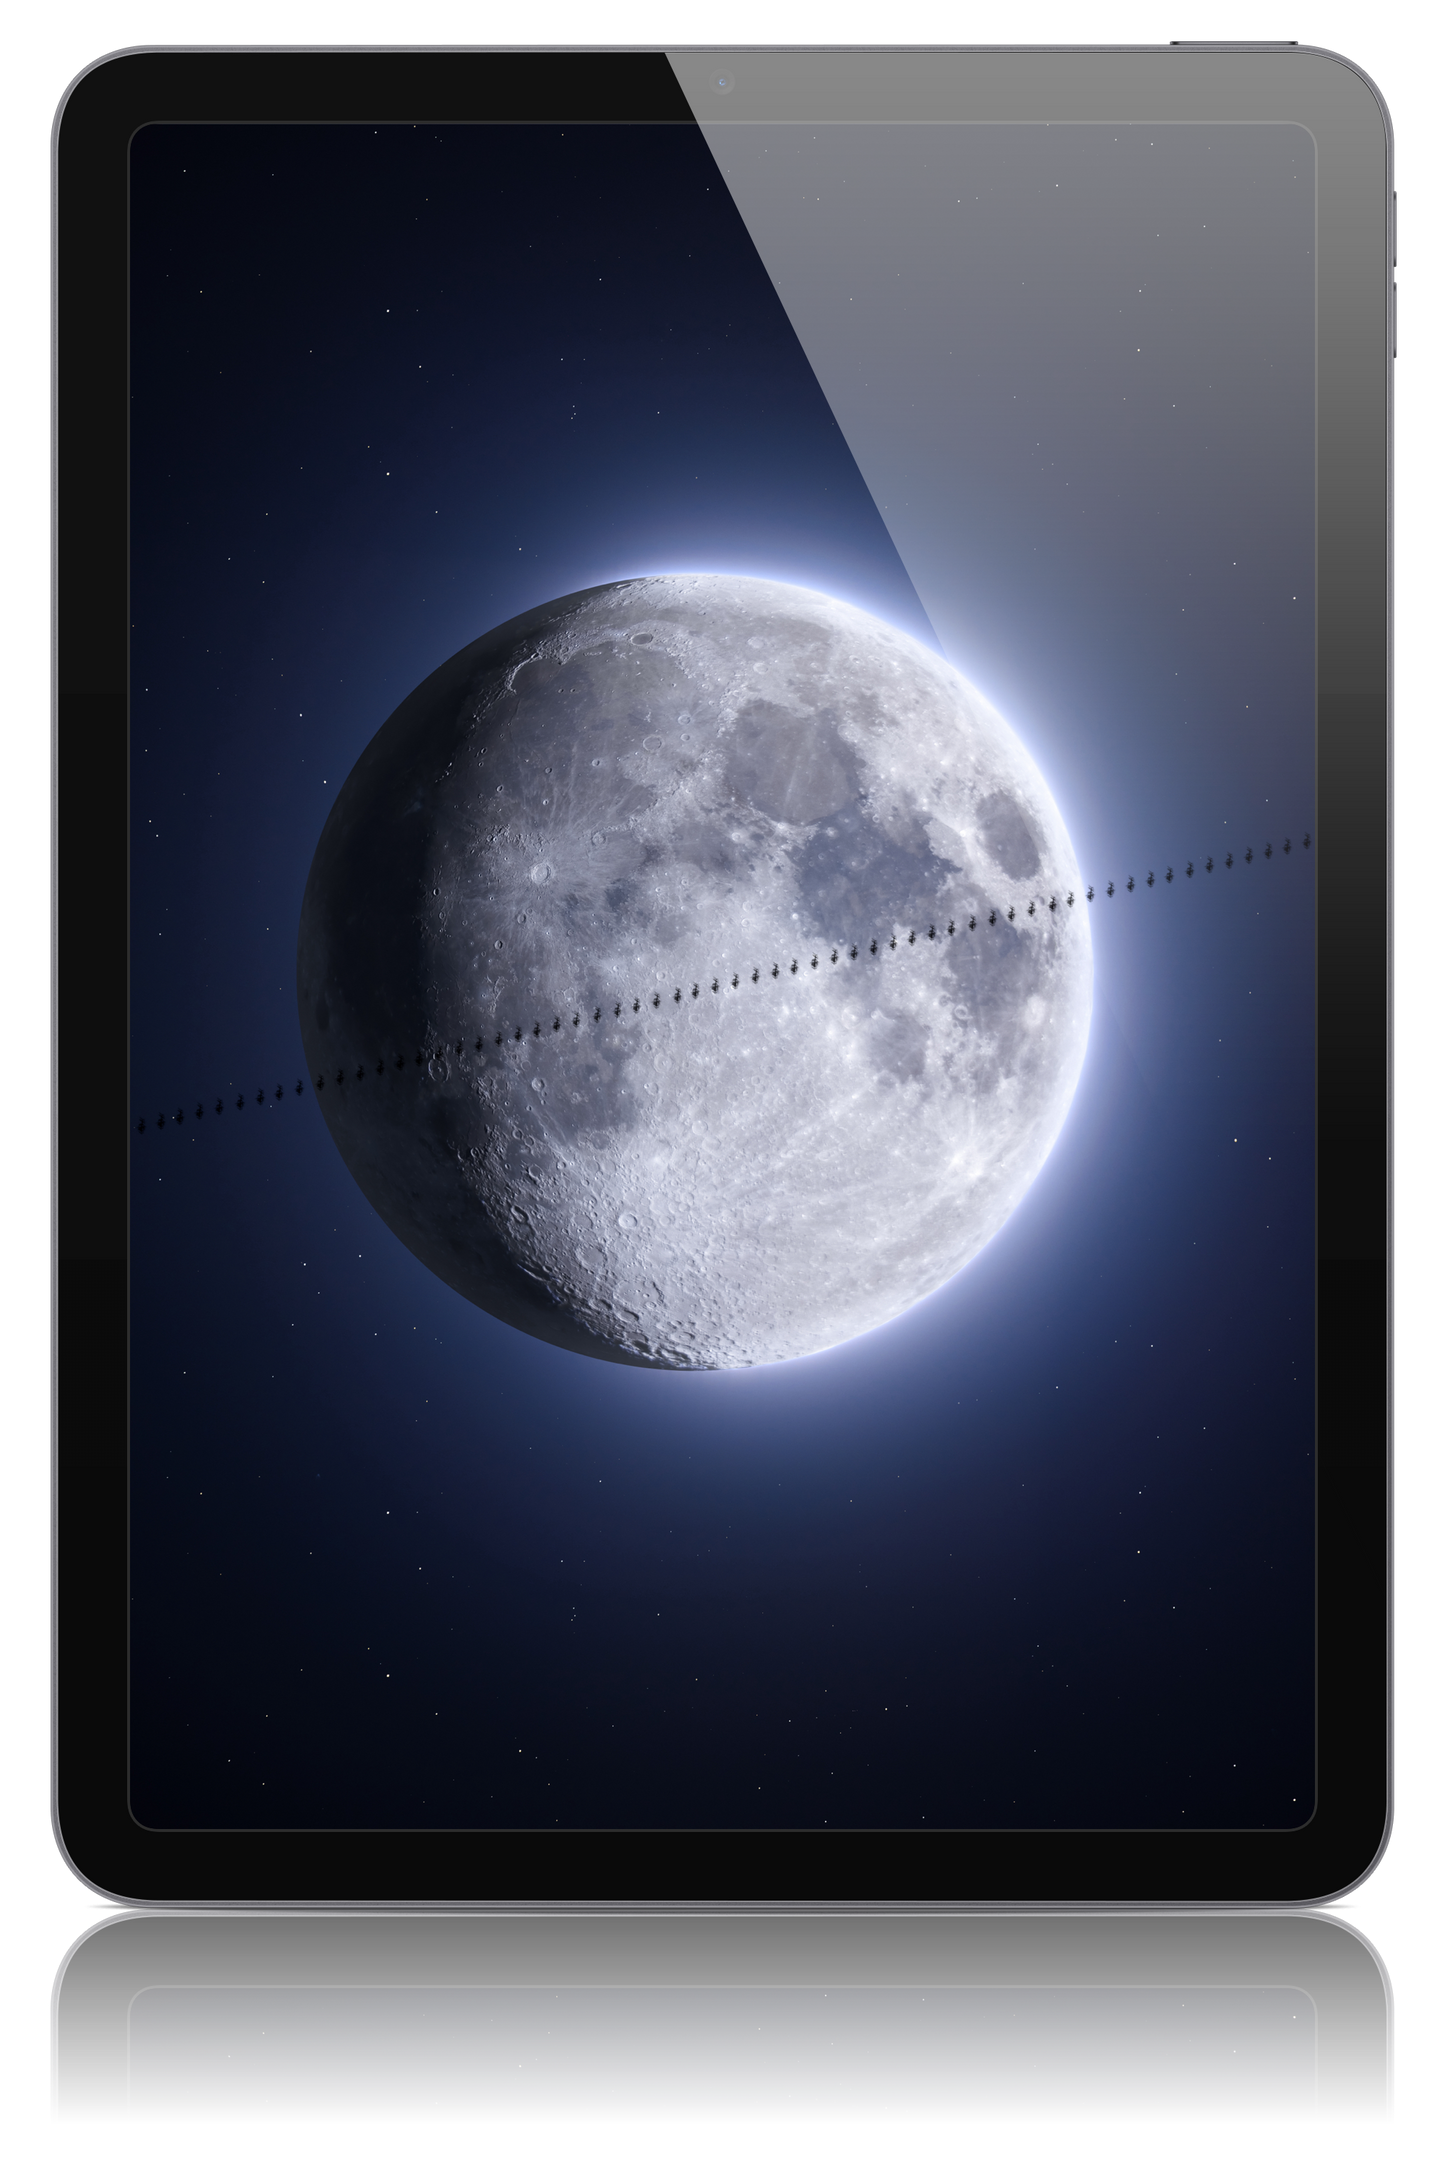 ISS Meets Moon March 21st 2024 Wallpaper Bundle